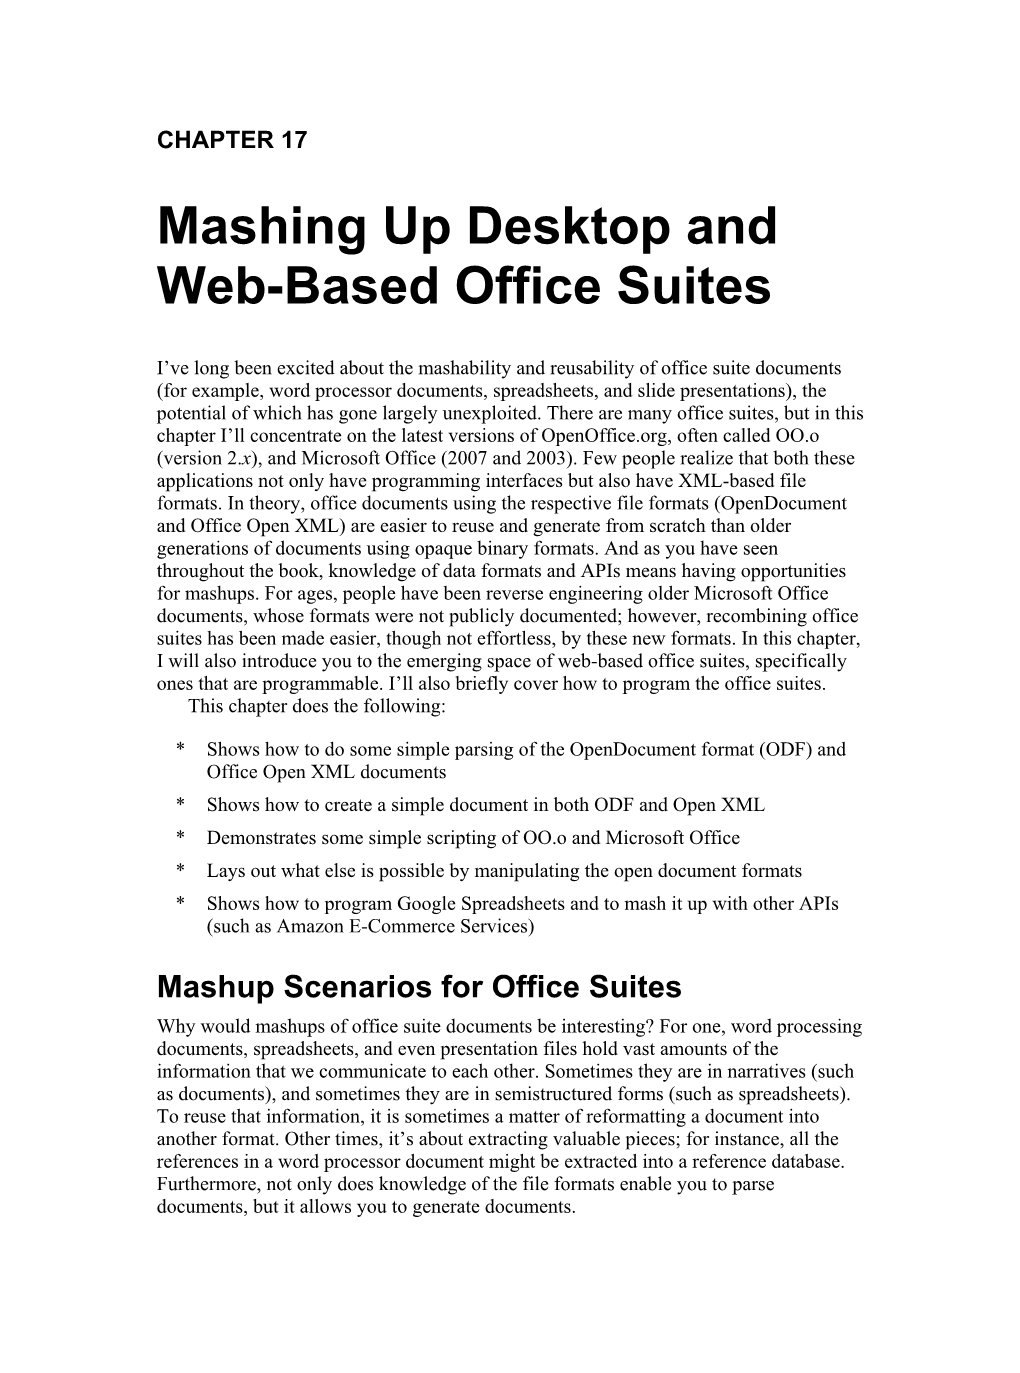 Online Office Suites Web-Based Offices Suites Are Emerging in Addition to the Traditional Desktop Office Suites and Their Respective File Formats